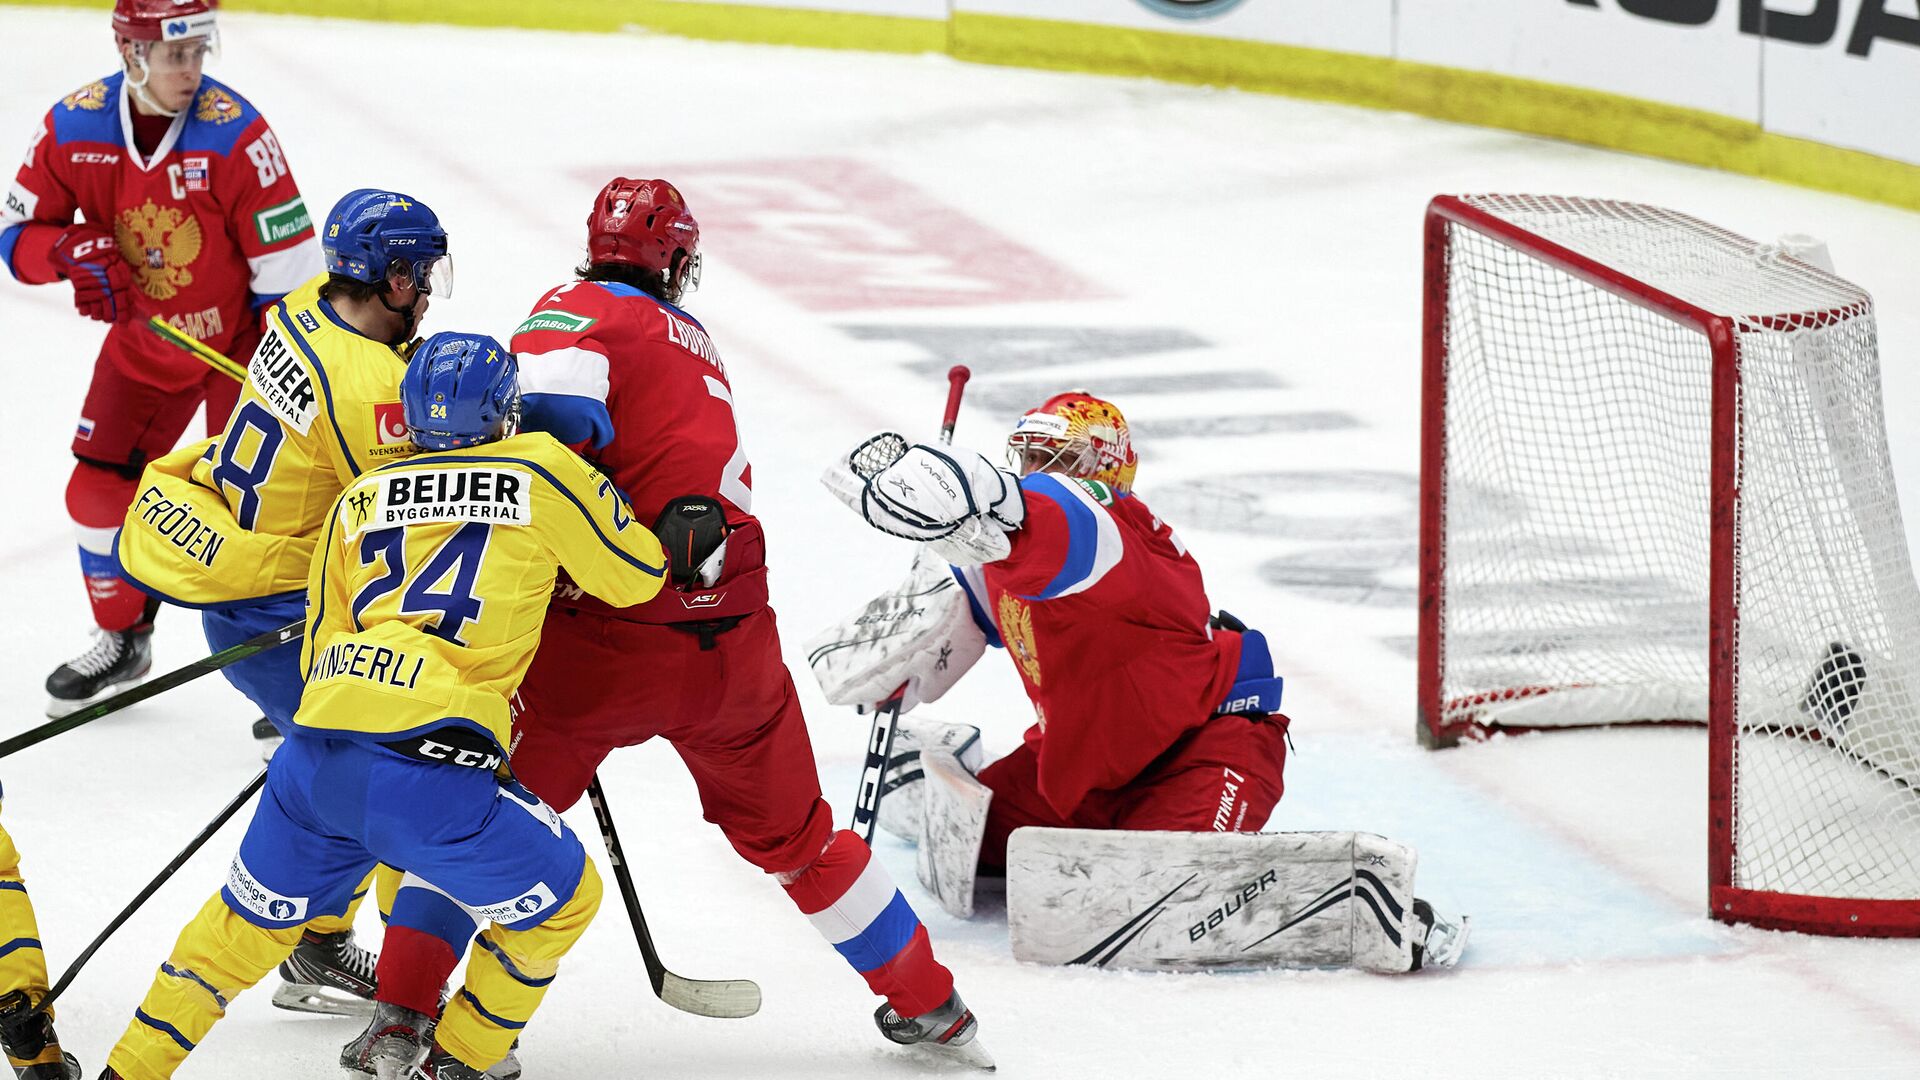 Russia's goalkeeper Alexander Samonov (R) makes a save during the Beijer Hockey Games (Euro Hockey Tour) ice hockey match between Sweden and Russia in Malmo on February 13, 2021. (Photo by Anders Bjuro / TT NEWS AGENCY / AFP) / Sweden OUT - РИА Новости, 1920, 13.02.2021